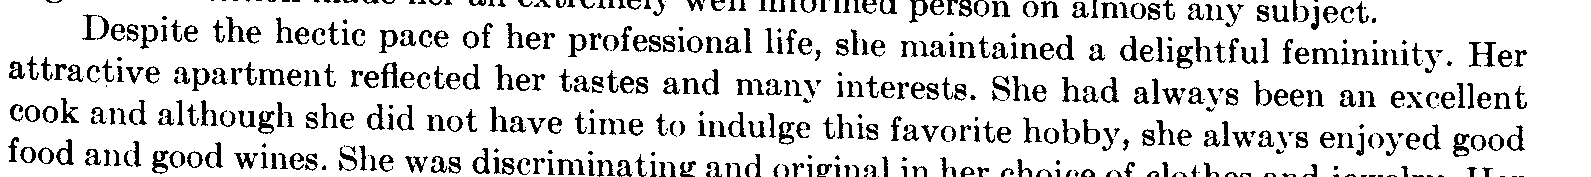 Excerpt from Dr. Sherman's Obituary by CJ Campbell 1964